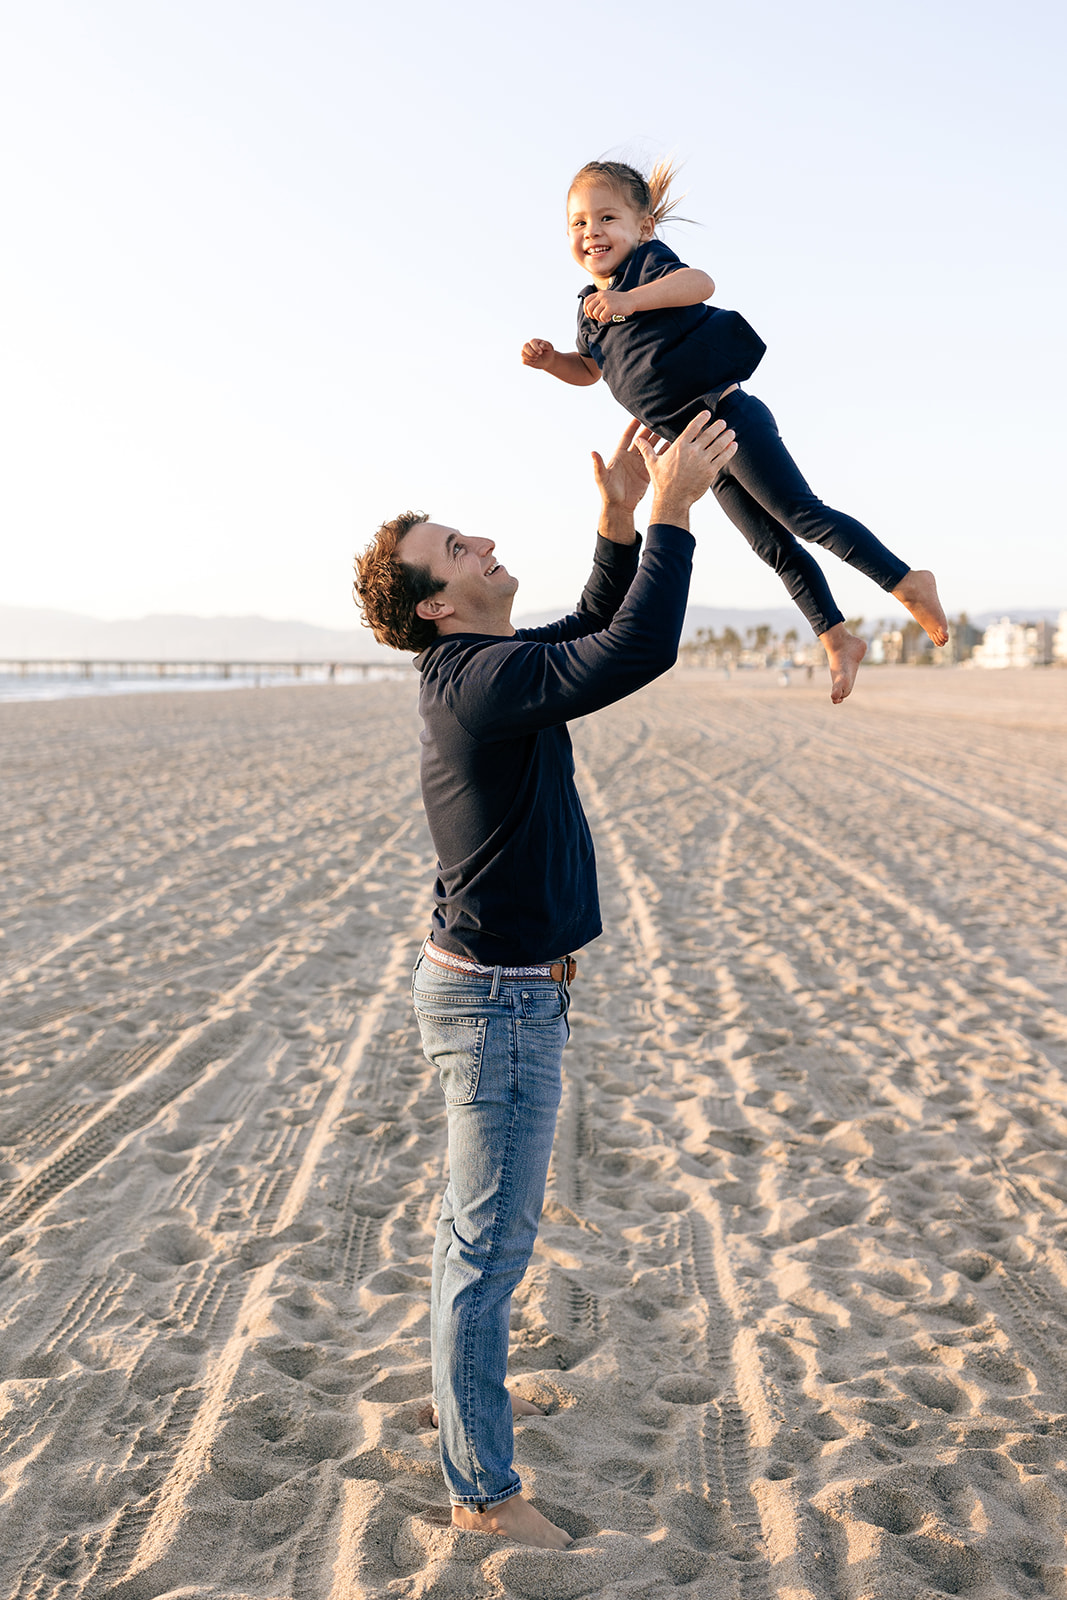 golden hour family maternity marina del rey california beach sunset couples poses couples on the beach photoshoot